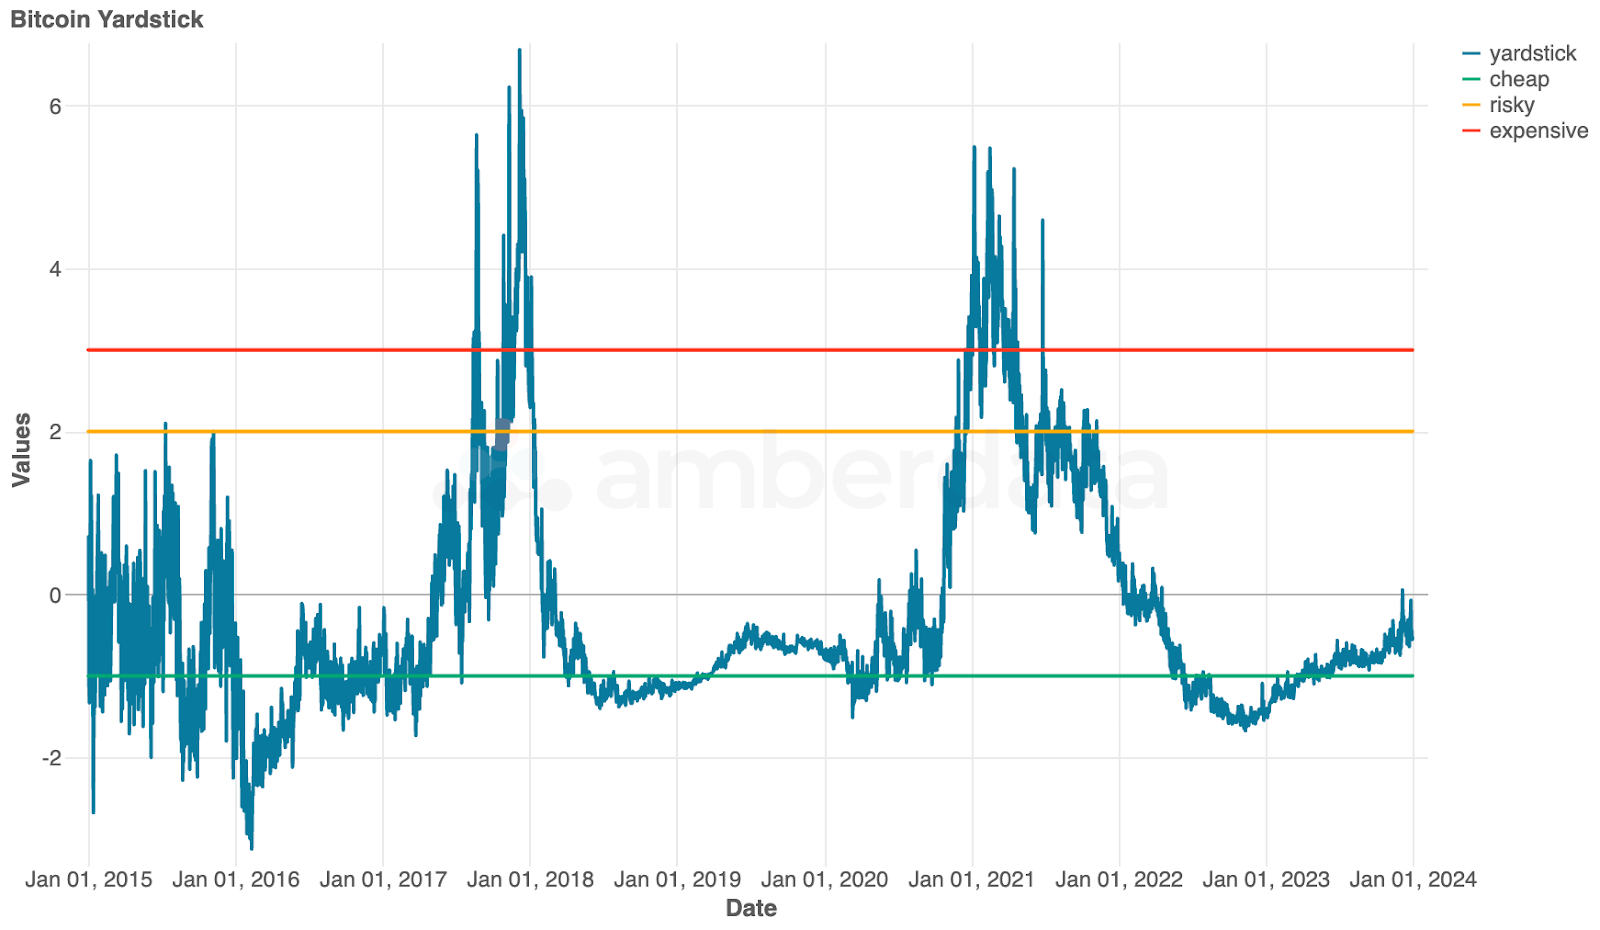 Amberdata Historical Bitcoin Yardstick. Cheap, risky, and expensive